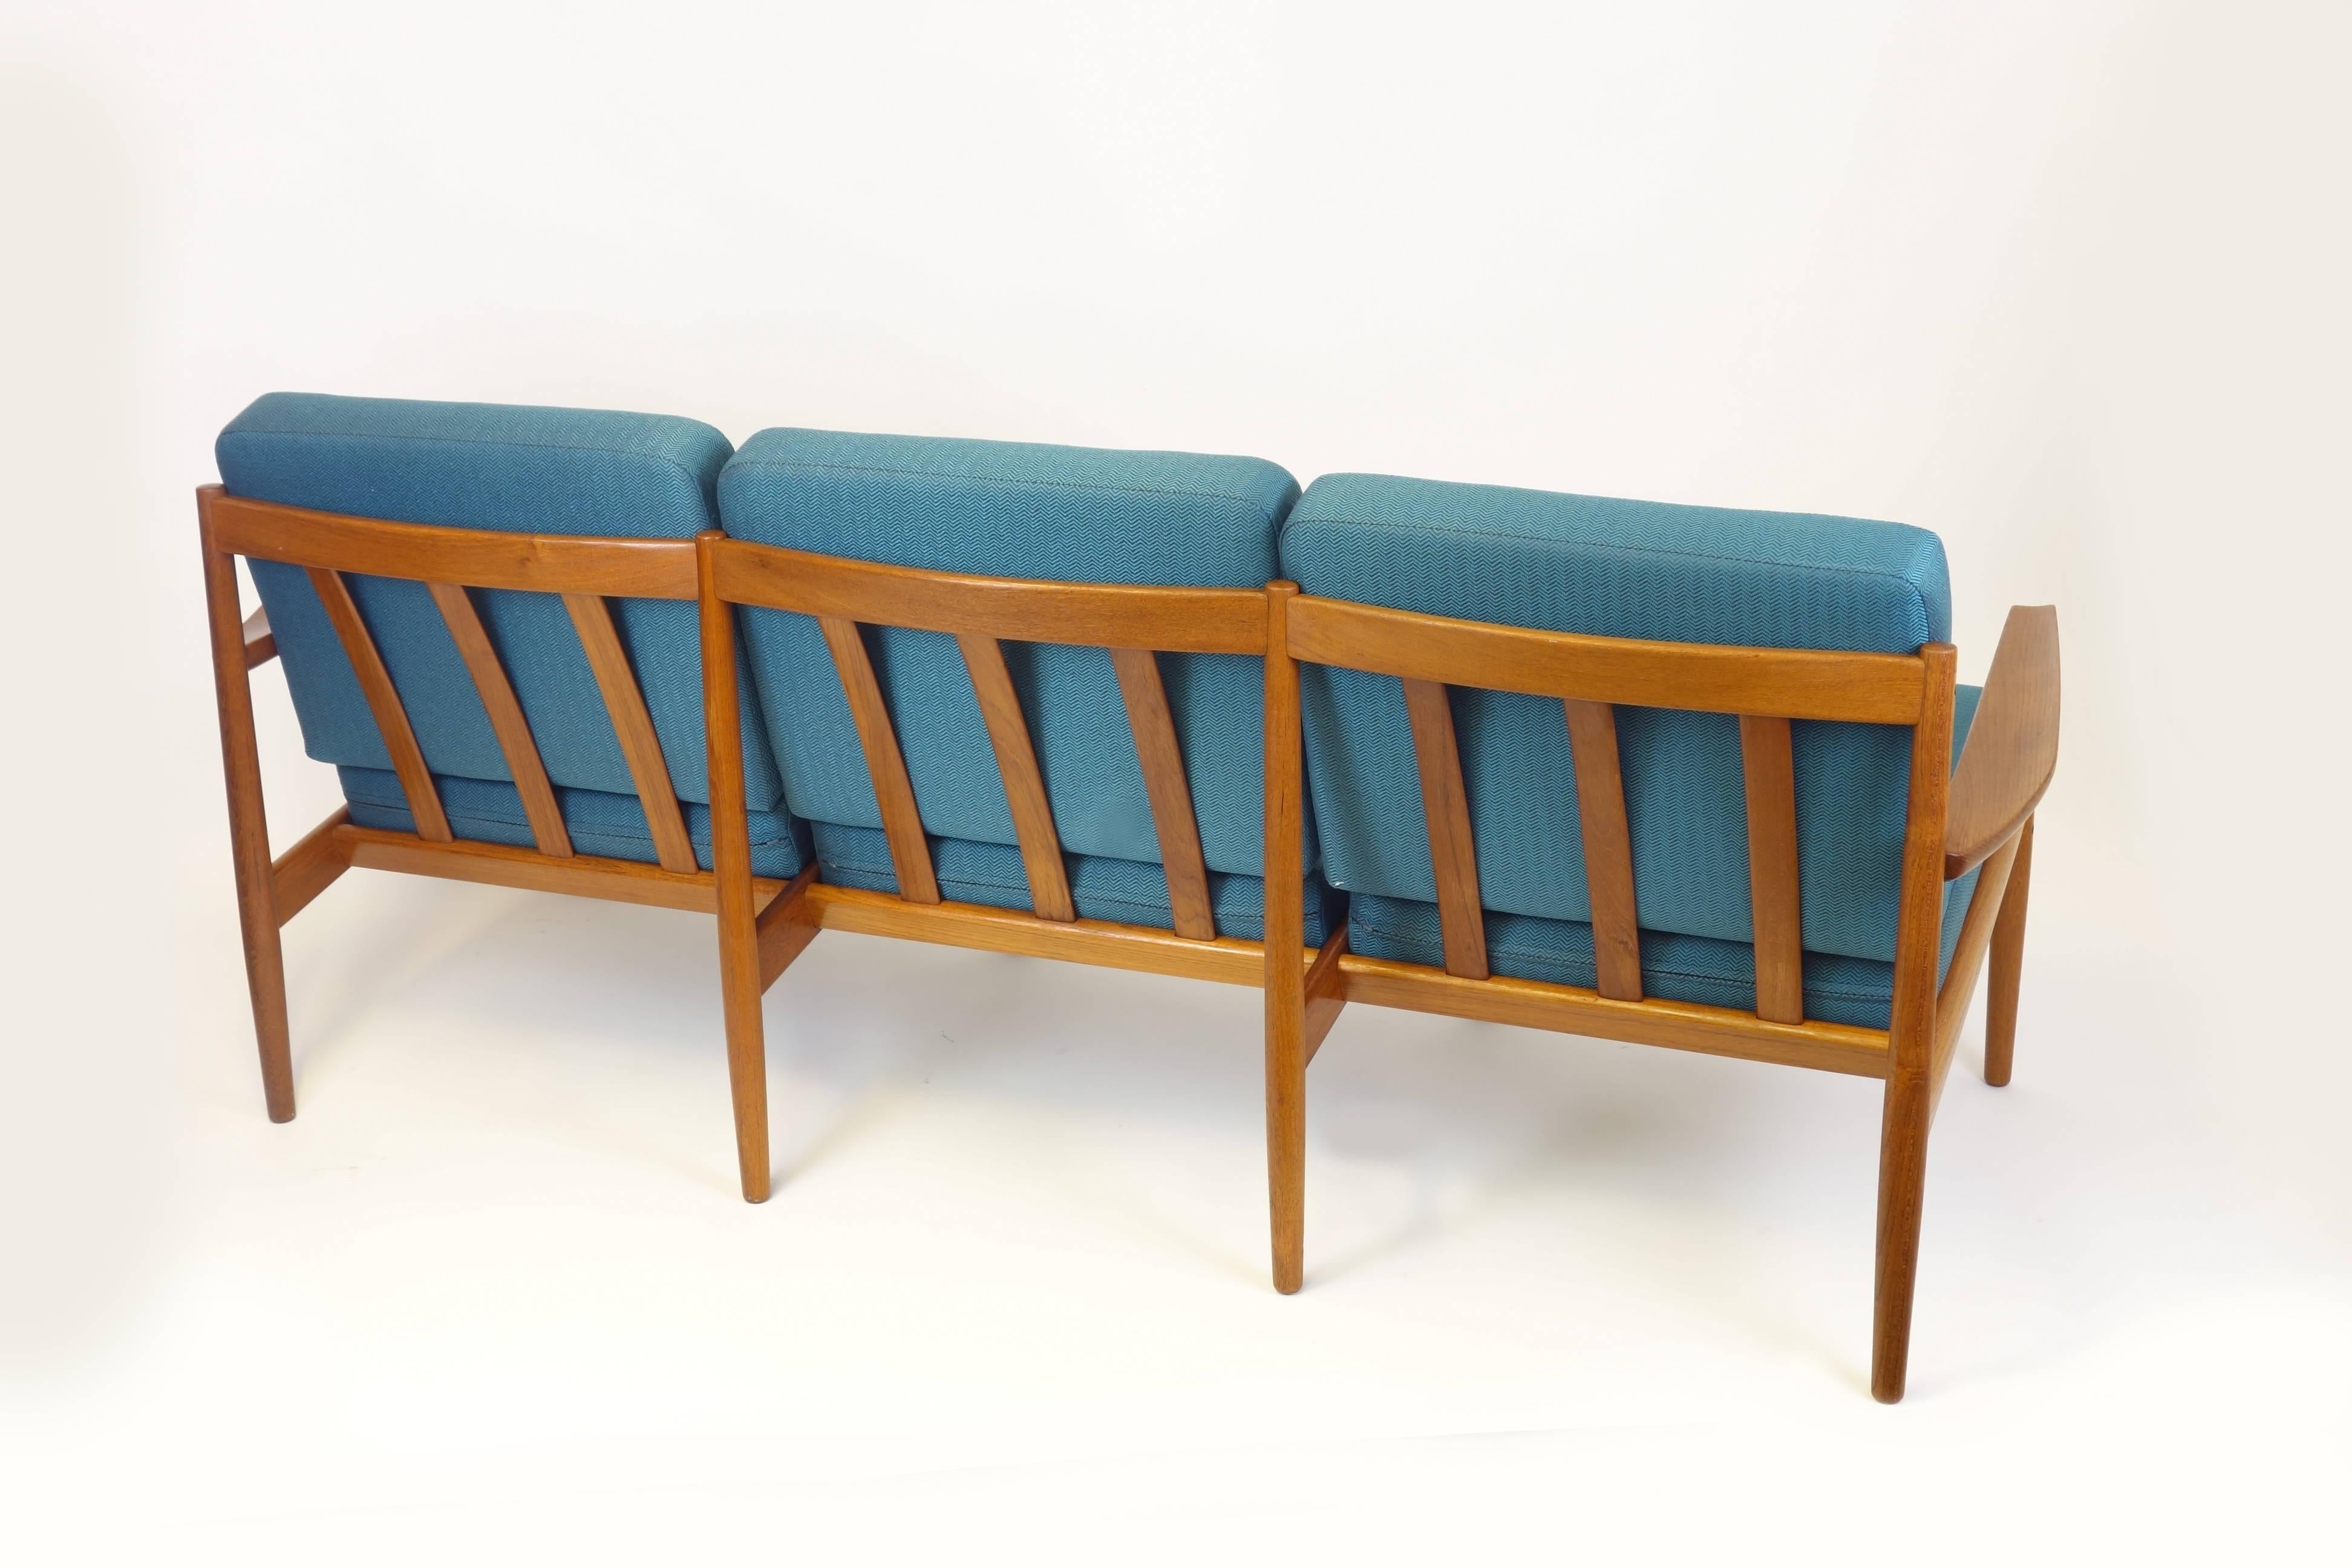 Outstandingly rare 3-seater couch or sofa by Grete Jalk for Dansk Mobler, Denmark 1960ies. Solid teakwood frame wearing the rectangular brass inlay as a sign of Jalk origin. Equipped with completely new padding and cover fabric in accurate reference